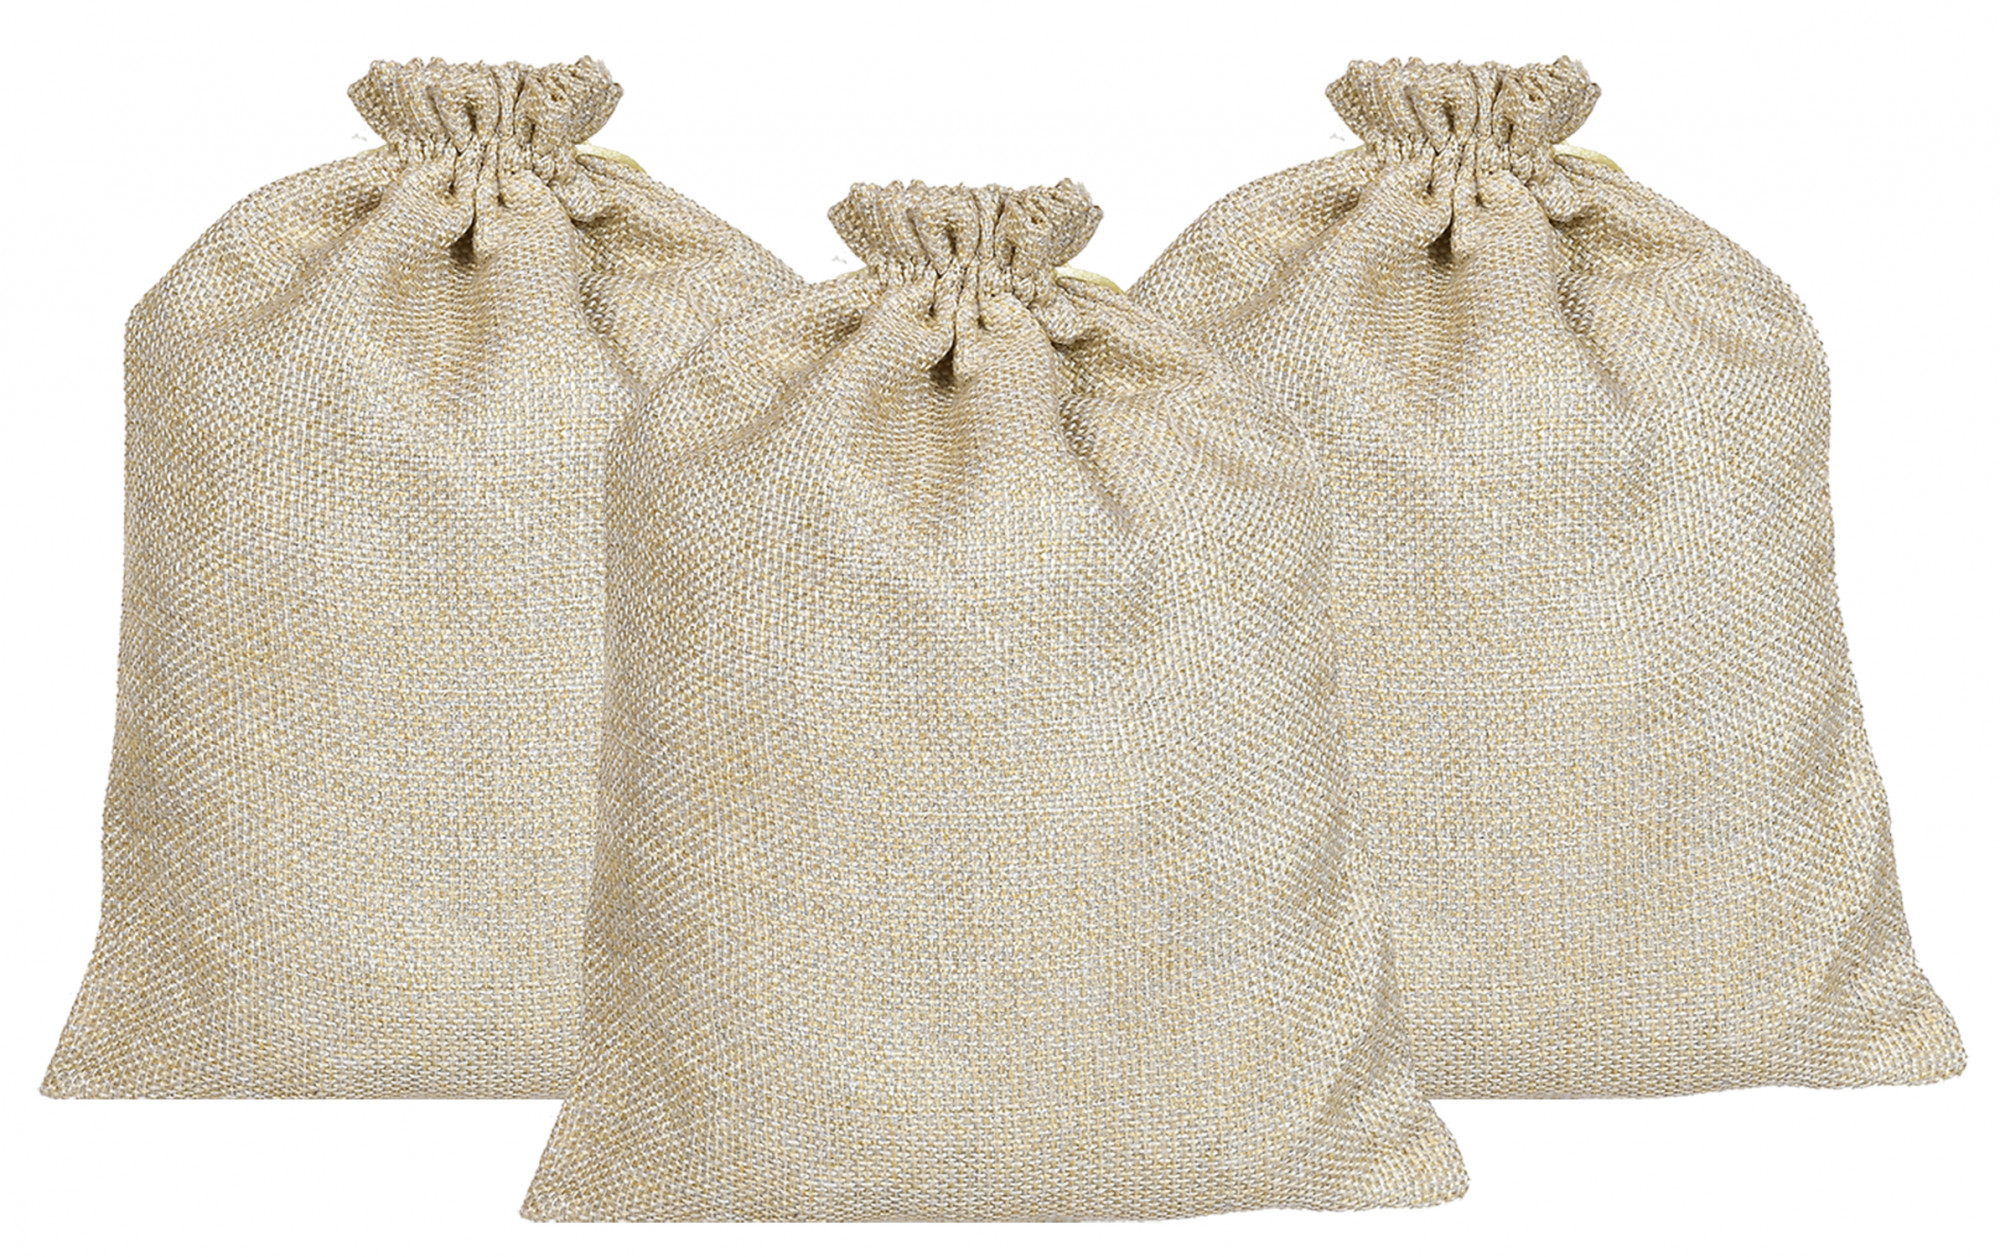 Kuber Industries Jute Small Size Gift Bags With Drawstring For Gifts Jewelry And Storage-(Gold)